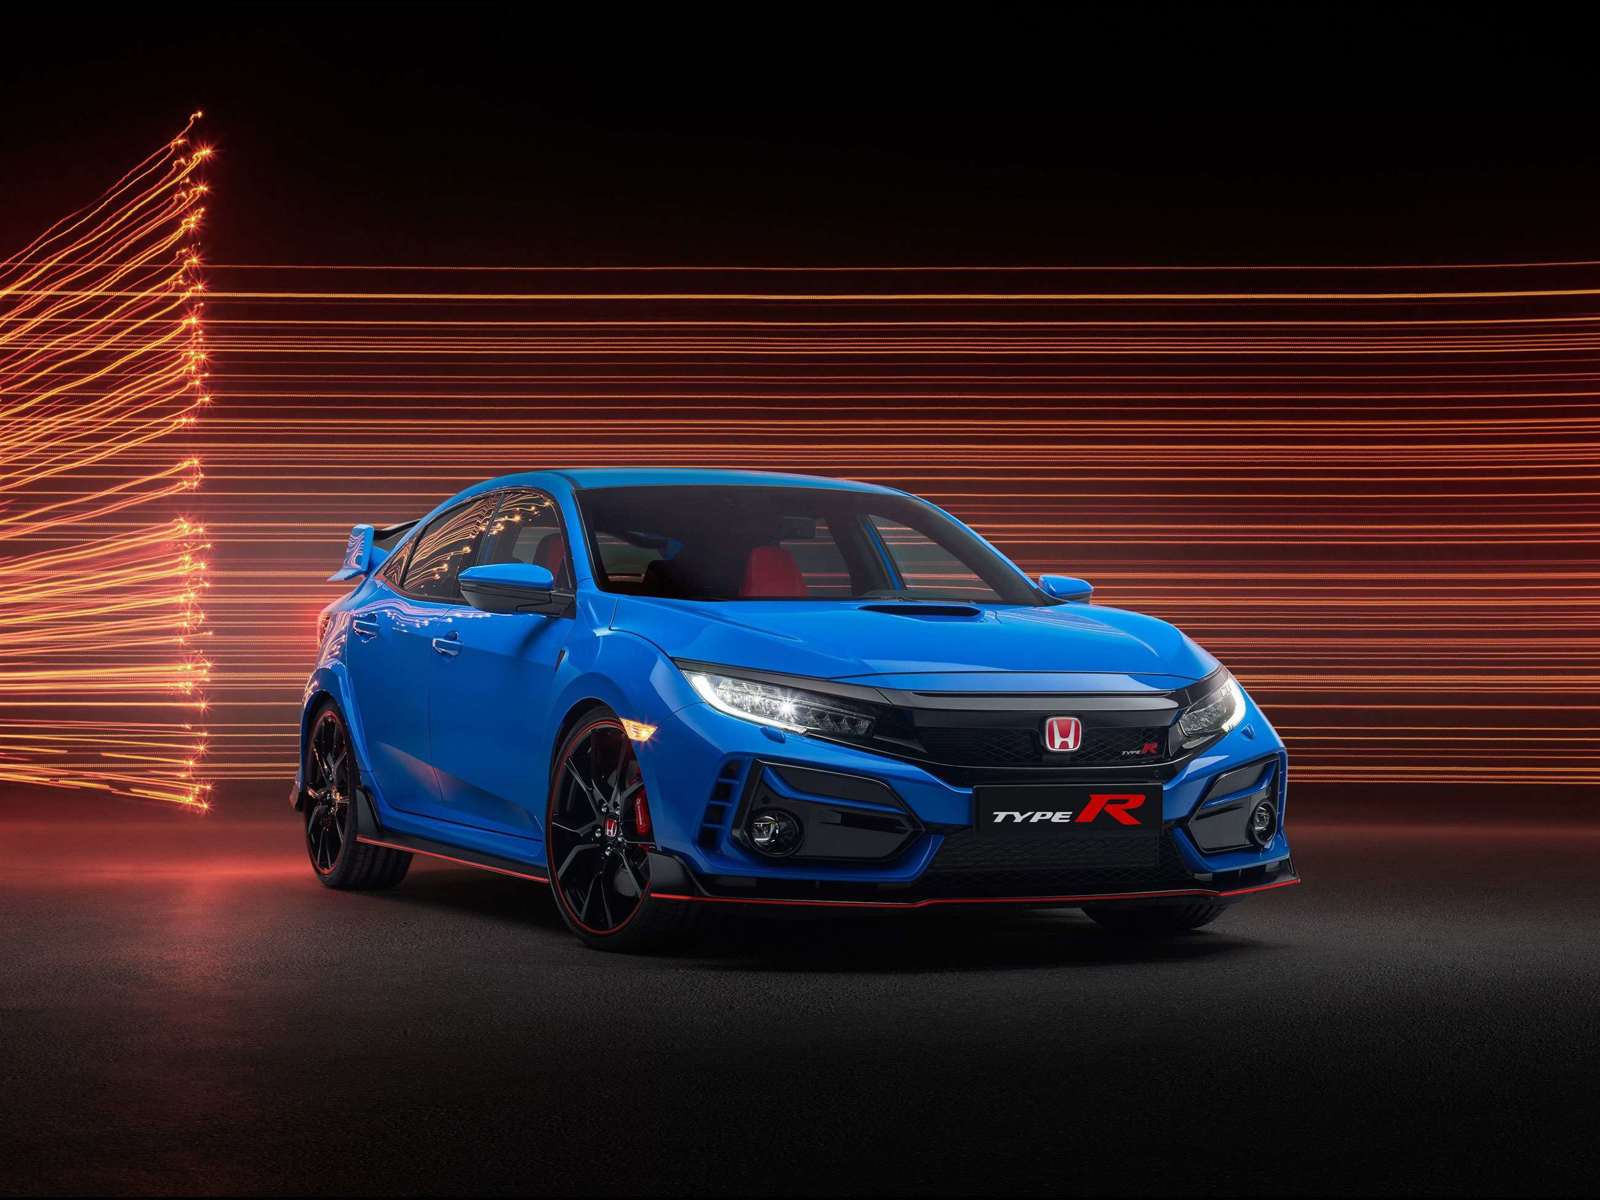 The Updated Honda Civic Type R Looks Just As Crazy As Before Grr